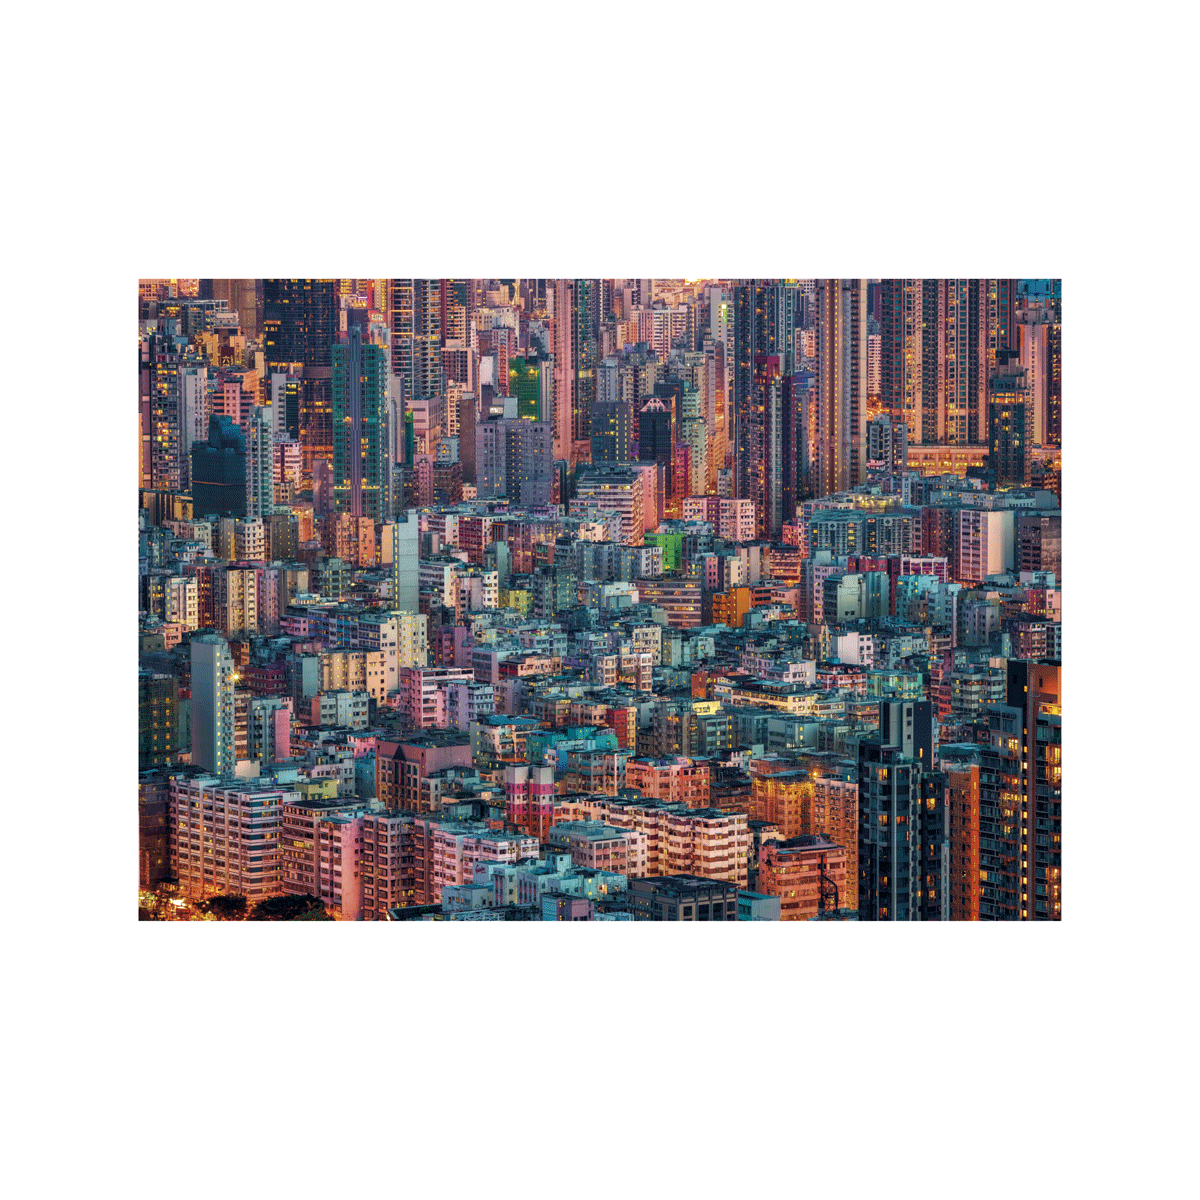 Clementoni puzzle high quality collection - the hive, hong kong - 1500 pezzi, puzzle adulti - CLEMENTONI